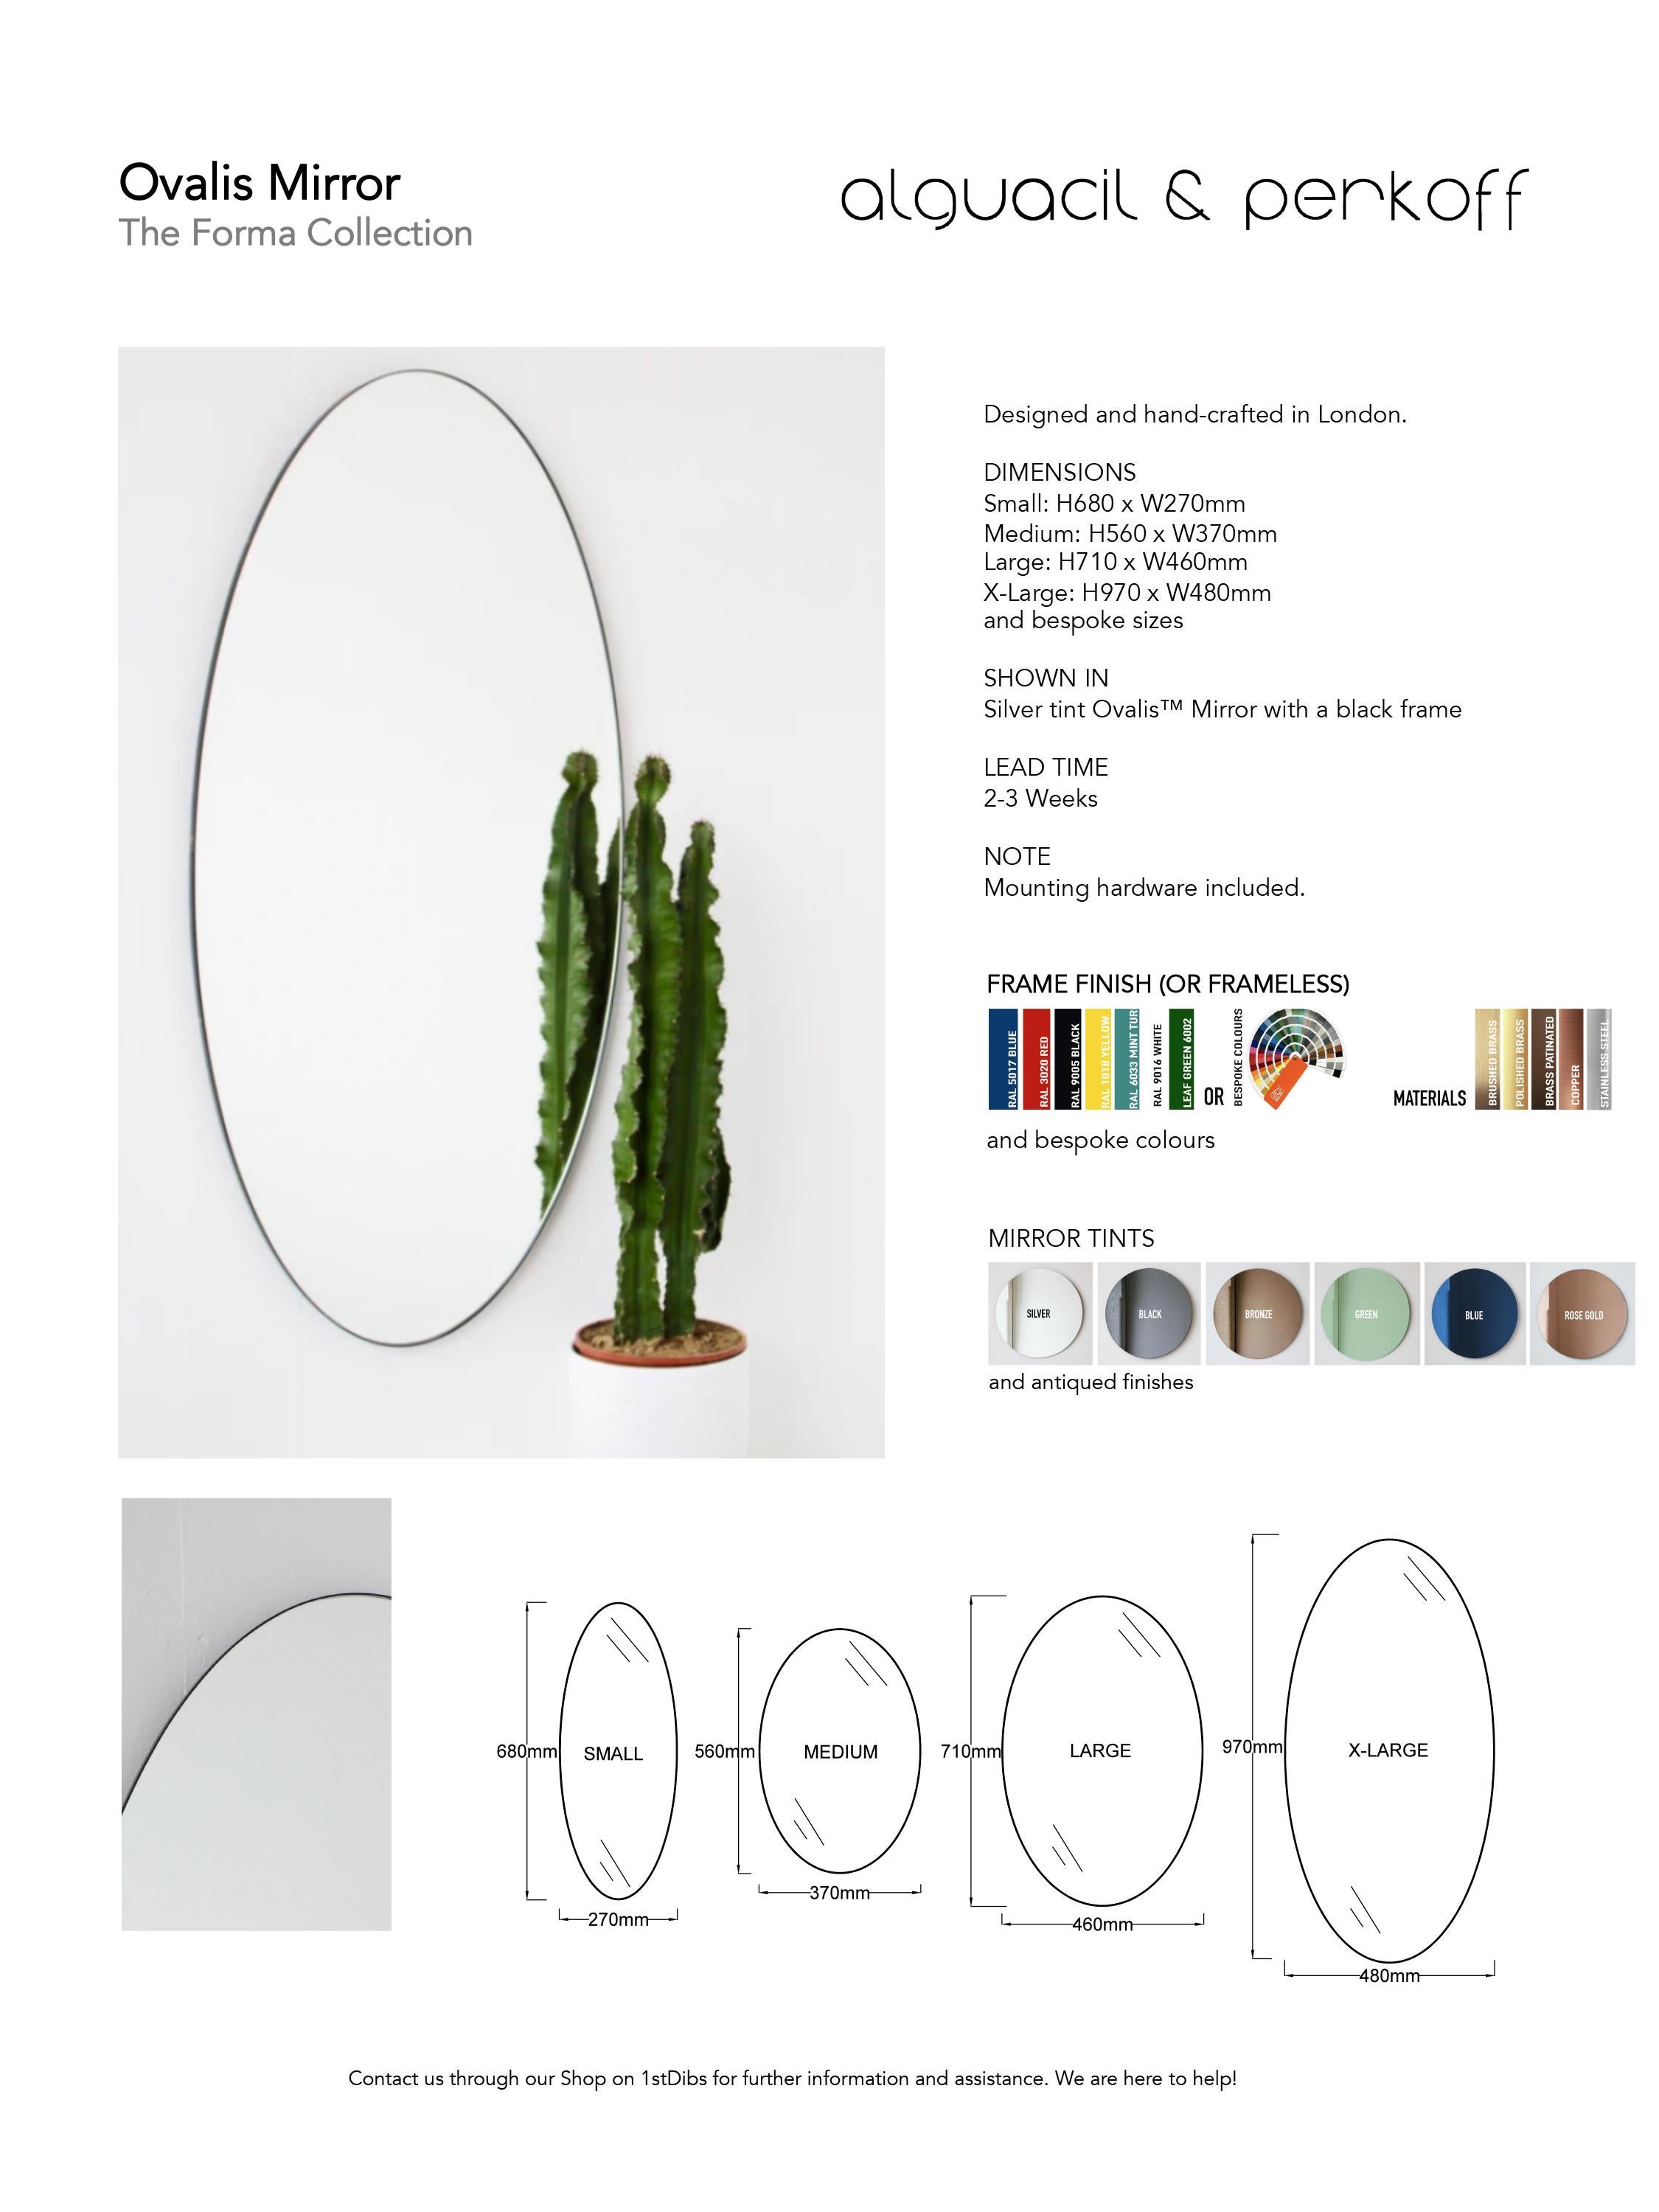 Aluminum Ovalis Ceiling Suspended Oval Shaped Mirror with Matte Black Frame For Sale